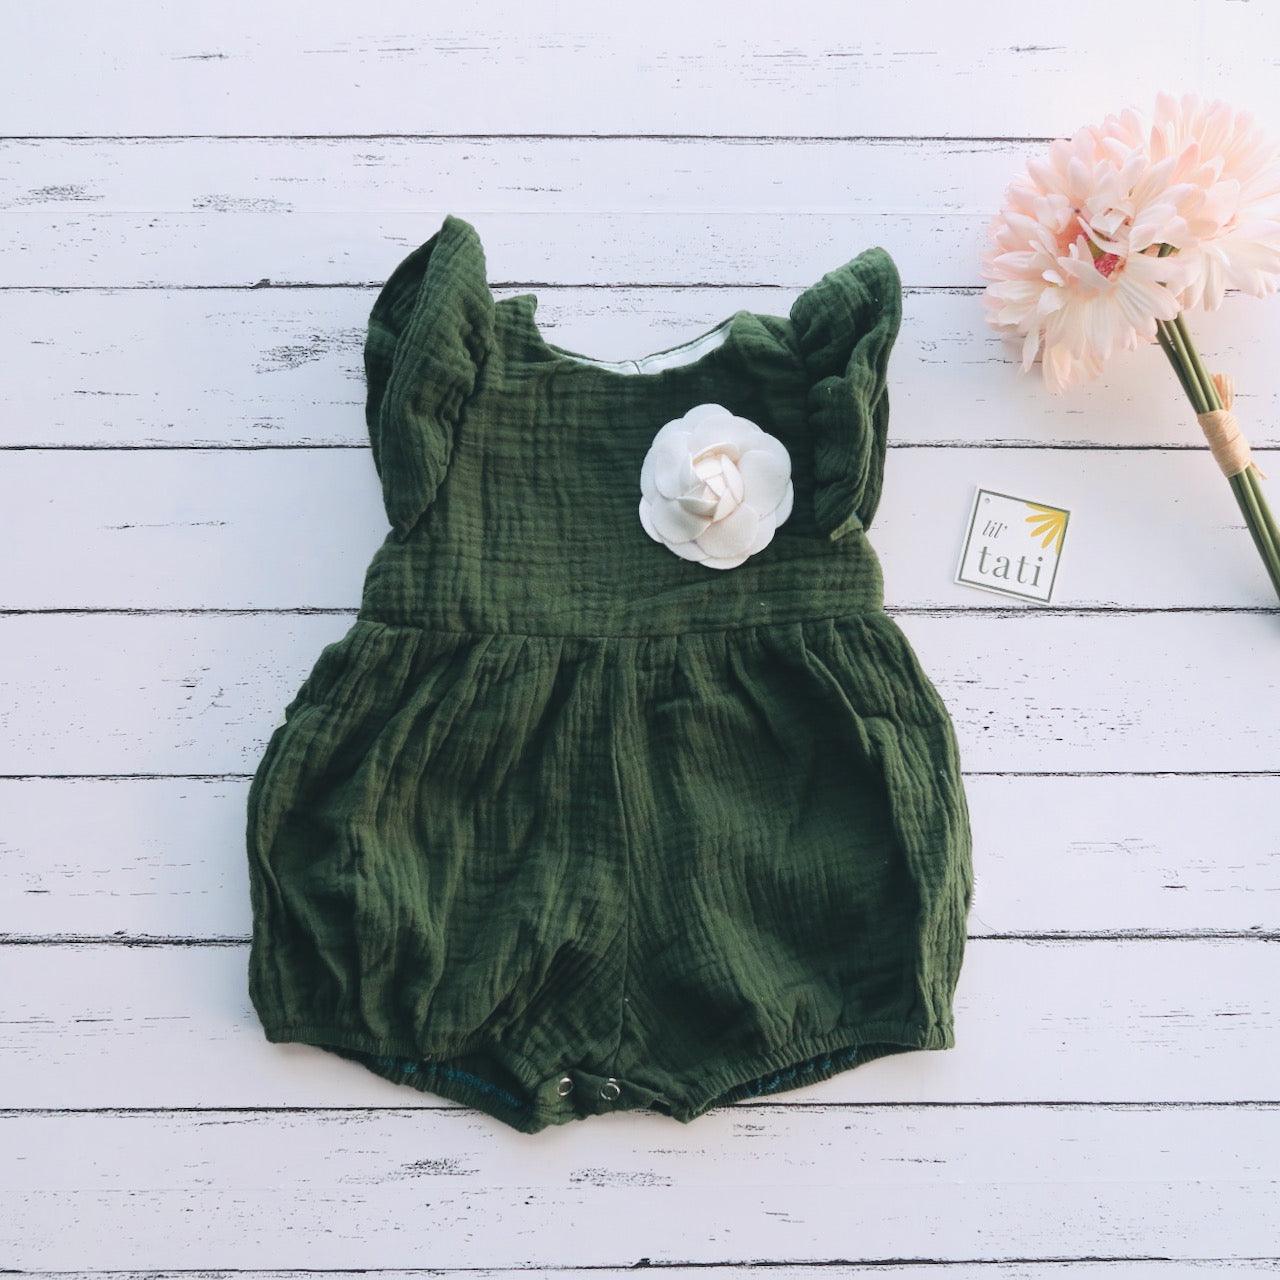 Orchid Playsuit - Ruffle Sleeves in Forest Green Crepe - Lil' Tati